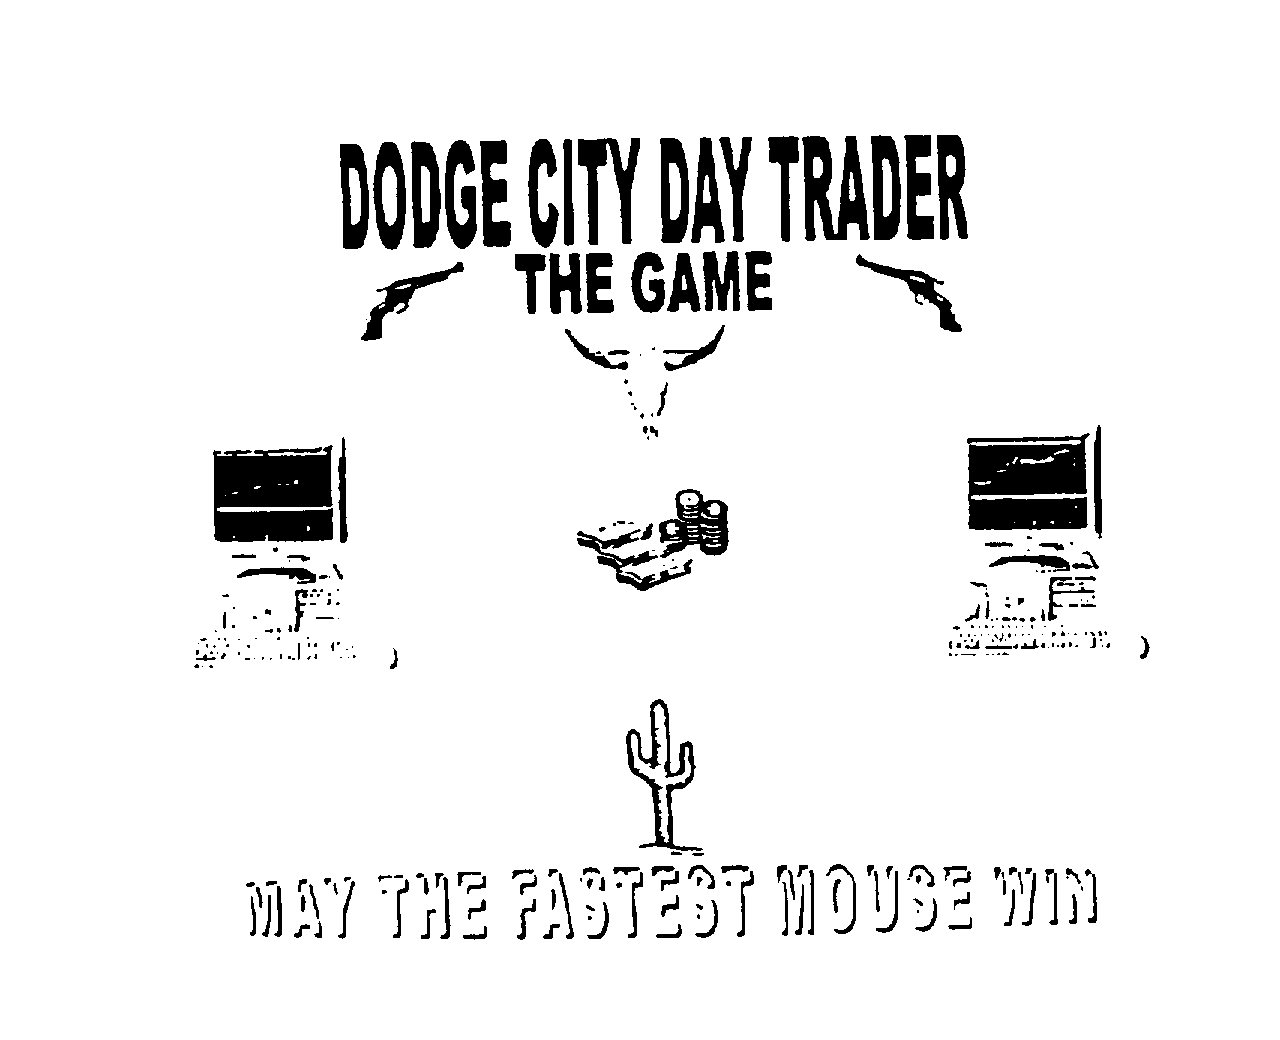  DODGE CITY DAY TRADER THE GAME MAY THE FASTEST MOUSE WIN